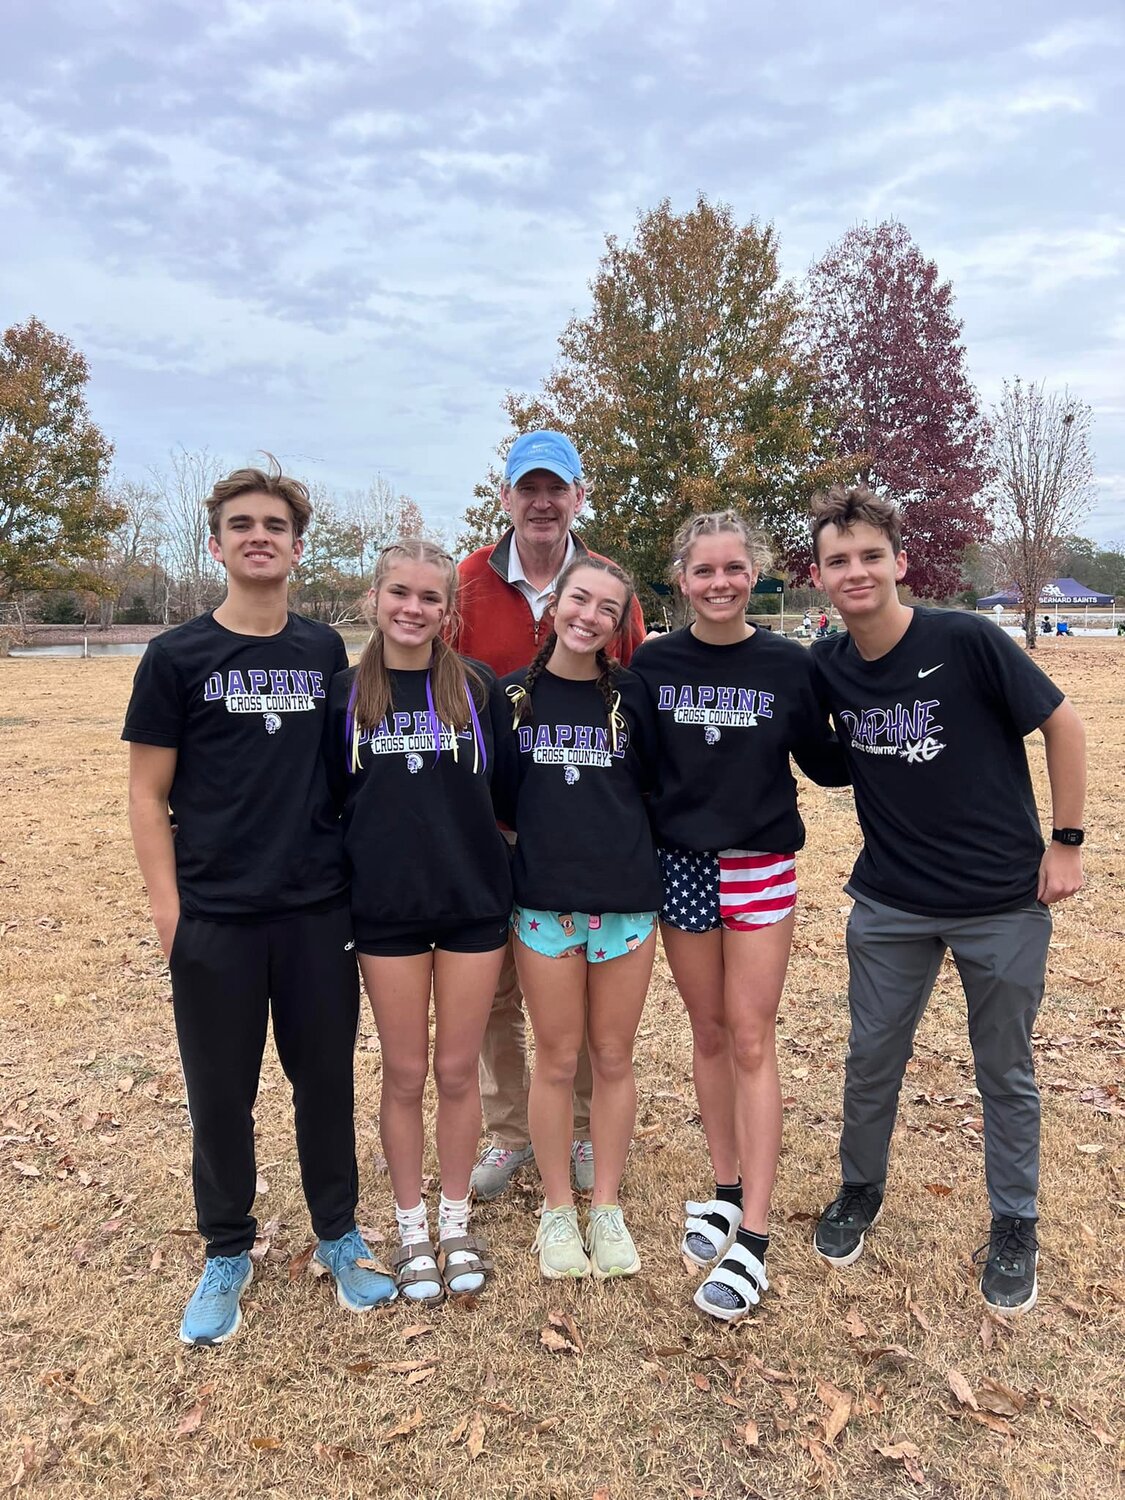 The Daphne Trojans had five representatives at the AHSAA State Cross Country Championship meet in Moulton on Saturday, Nov. 11, including Sam Sternberg, Sophie West, Chloe Glass, Abigail Norman and Ben Cotton.